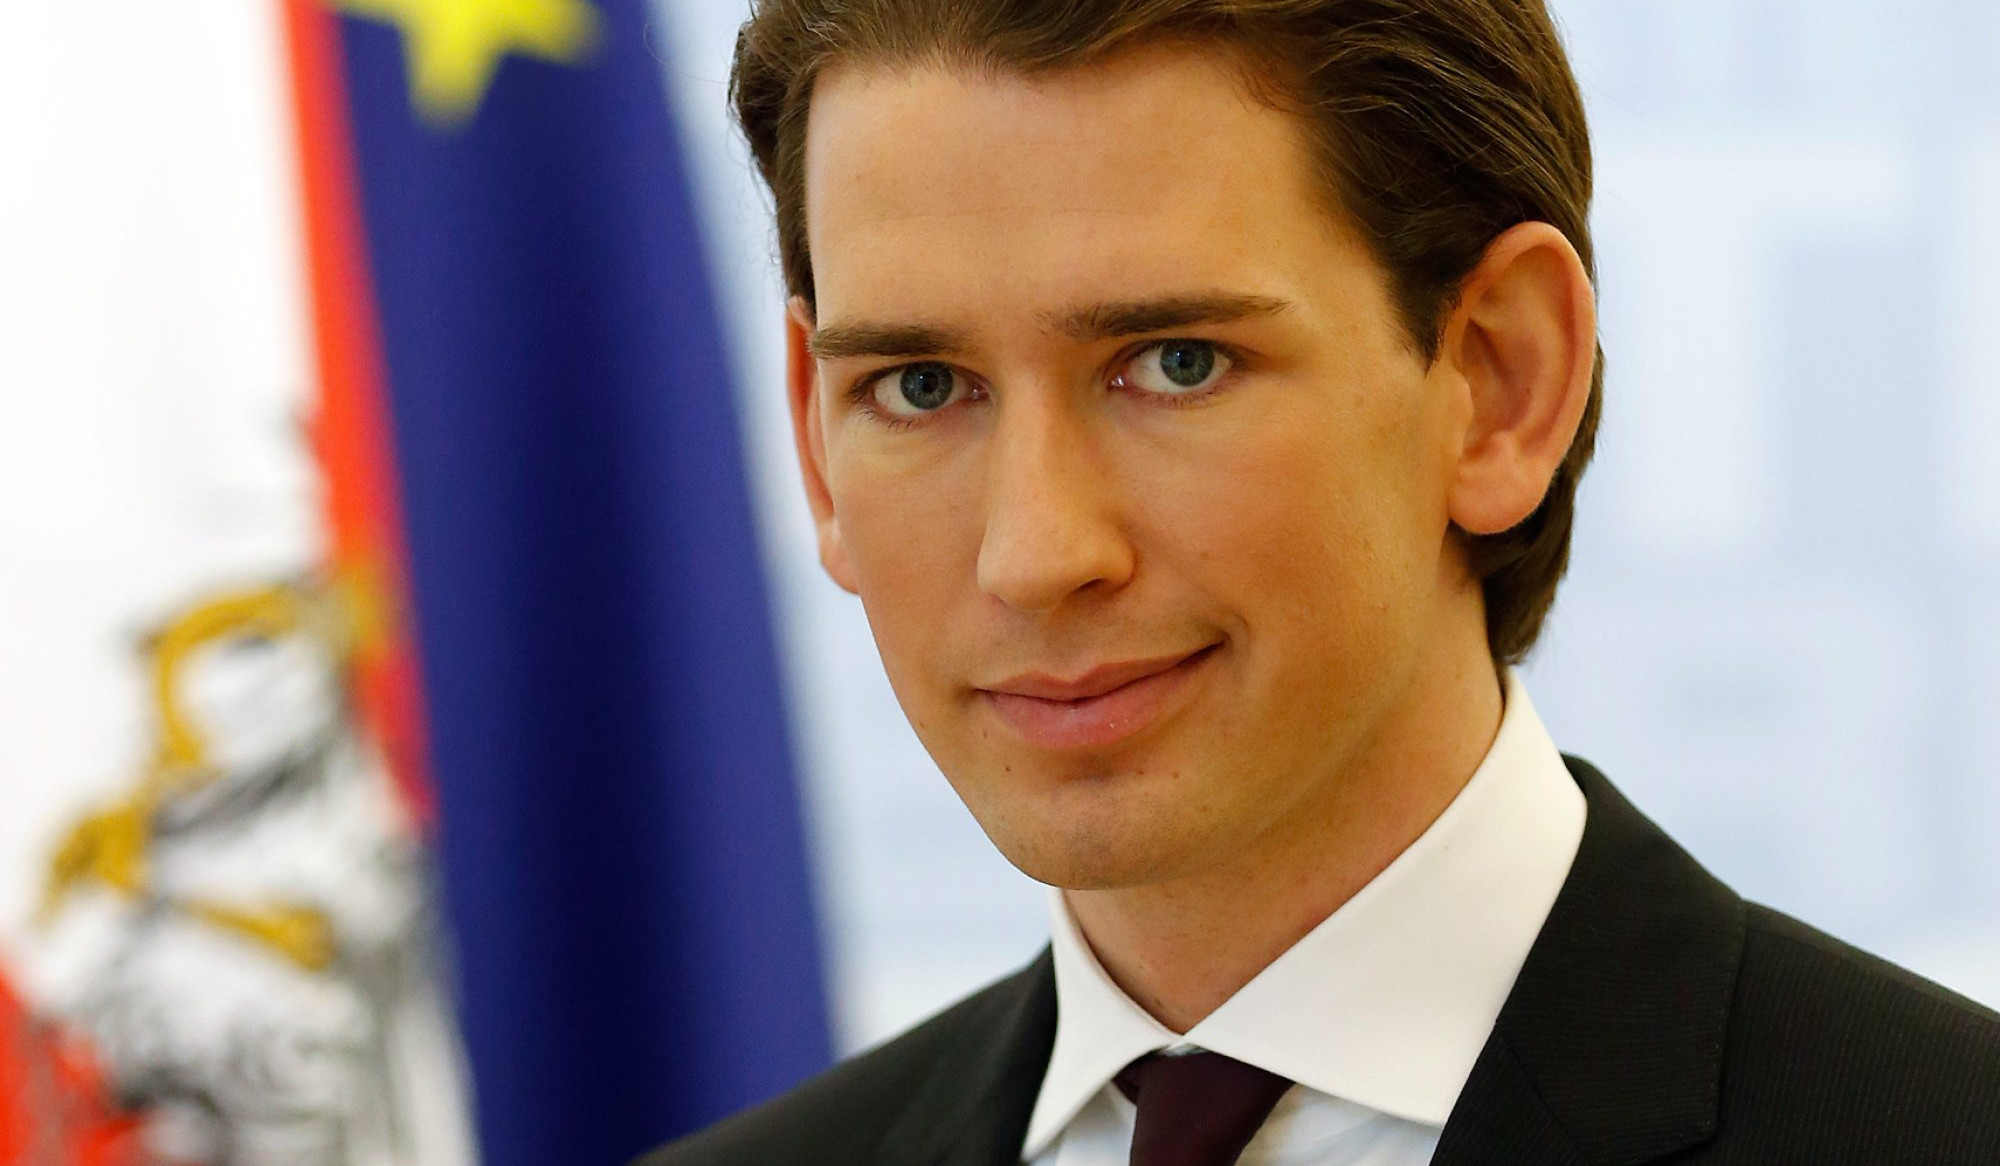 Austrian leader vows to stay on amid bribery allegations